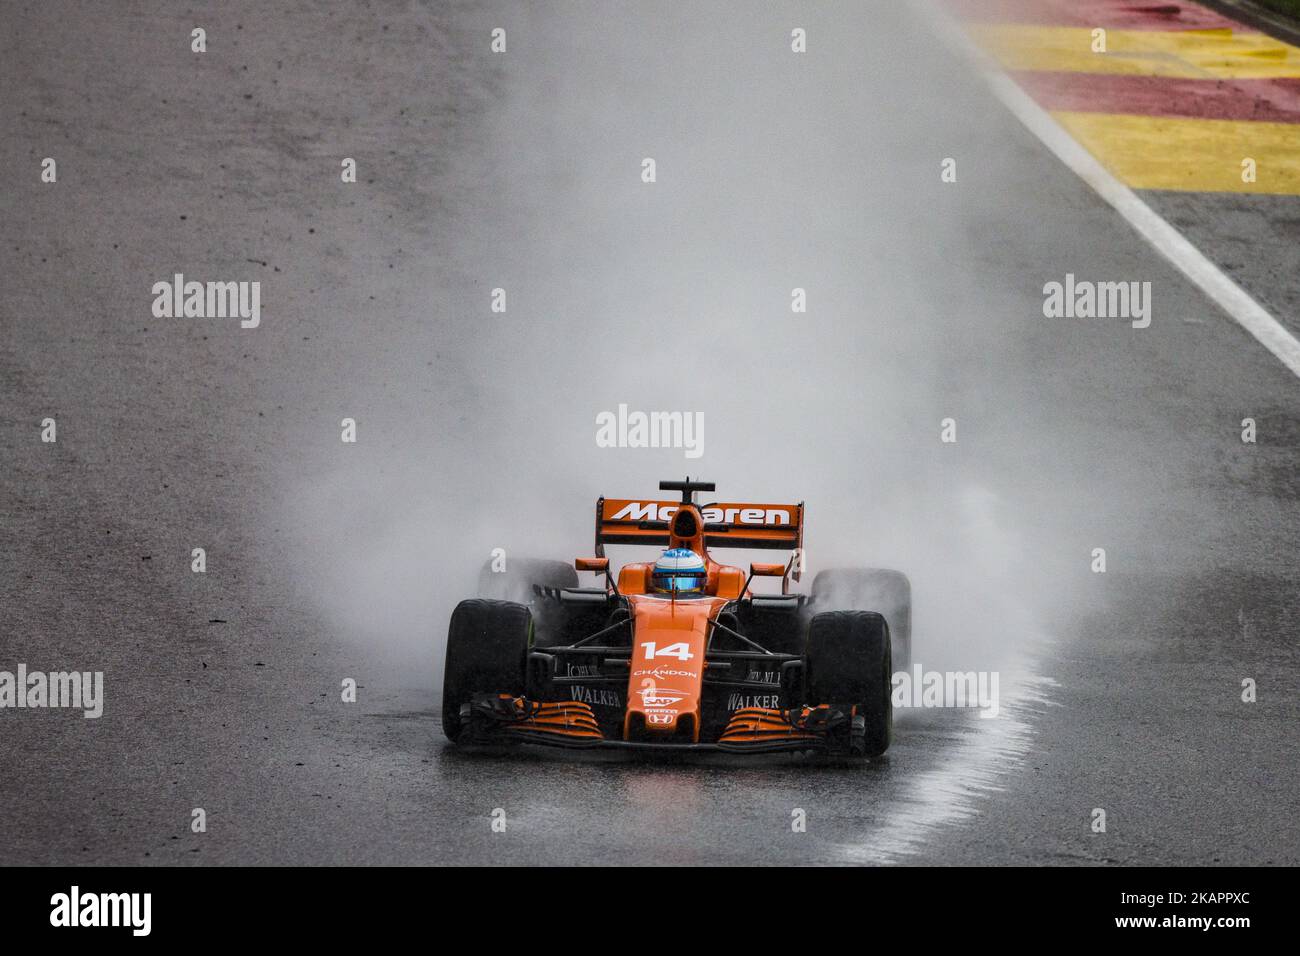 14 ALONSO Fernando from Spain from McLaren Honda with the extreme wet pirelli tyres, under heavy rain at the end of FP2 during the Formula One Belgian Grand Prix at Circuit de Spa-Francorchamps on August 25, 2017 in Spa, Belgium. (Photo by Xavier Bonilla/NurPhoto) Stock Photo